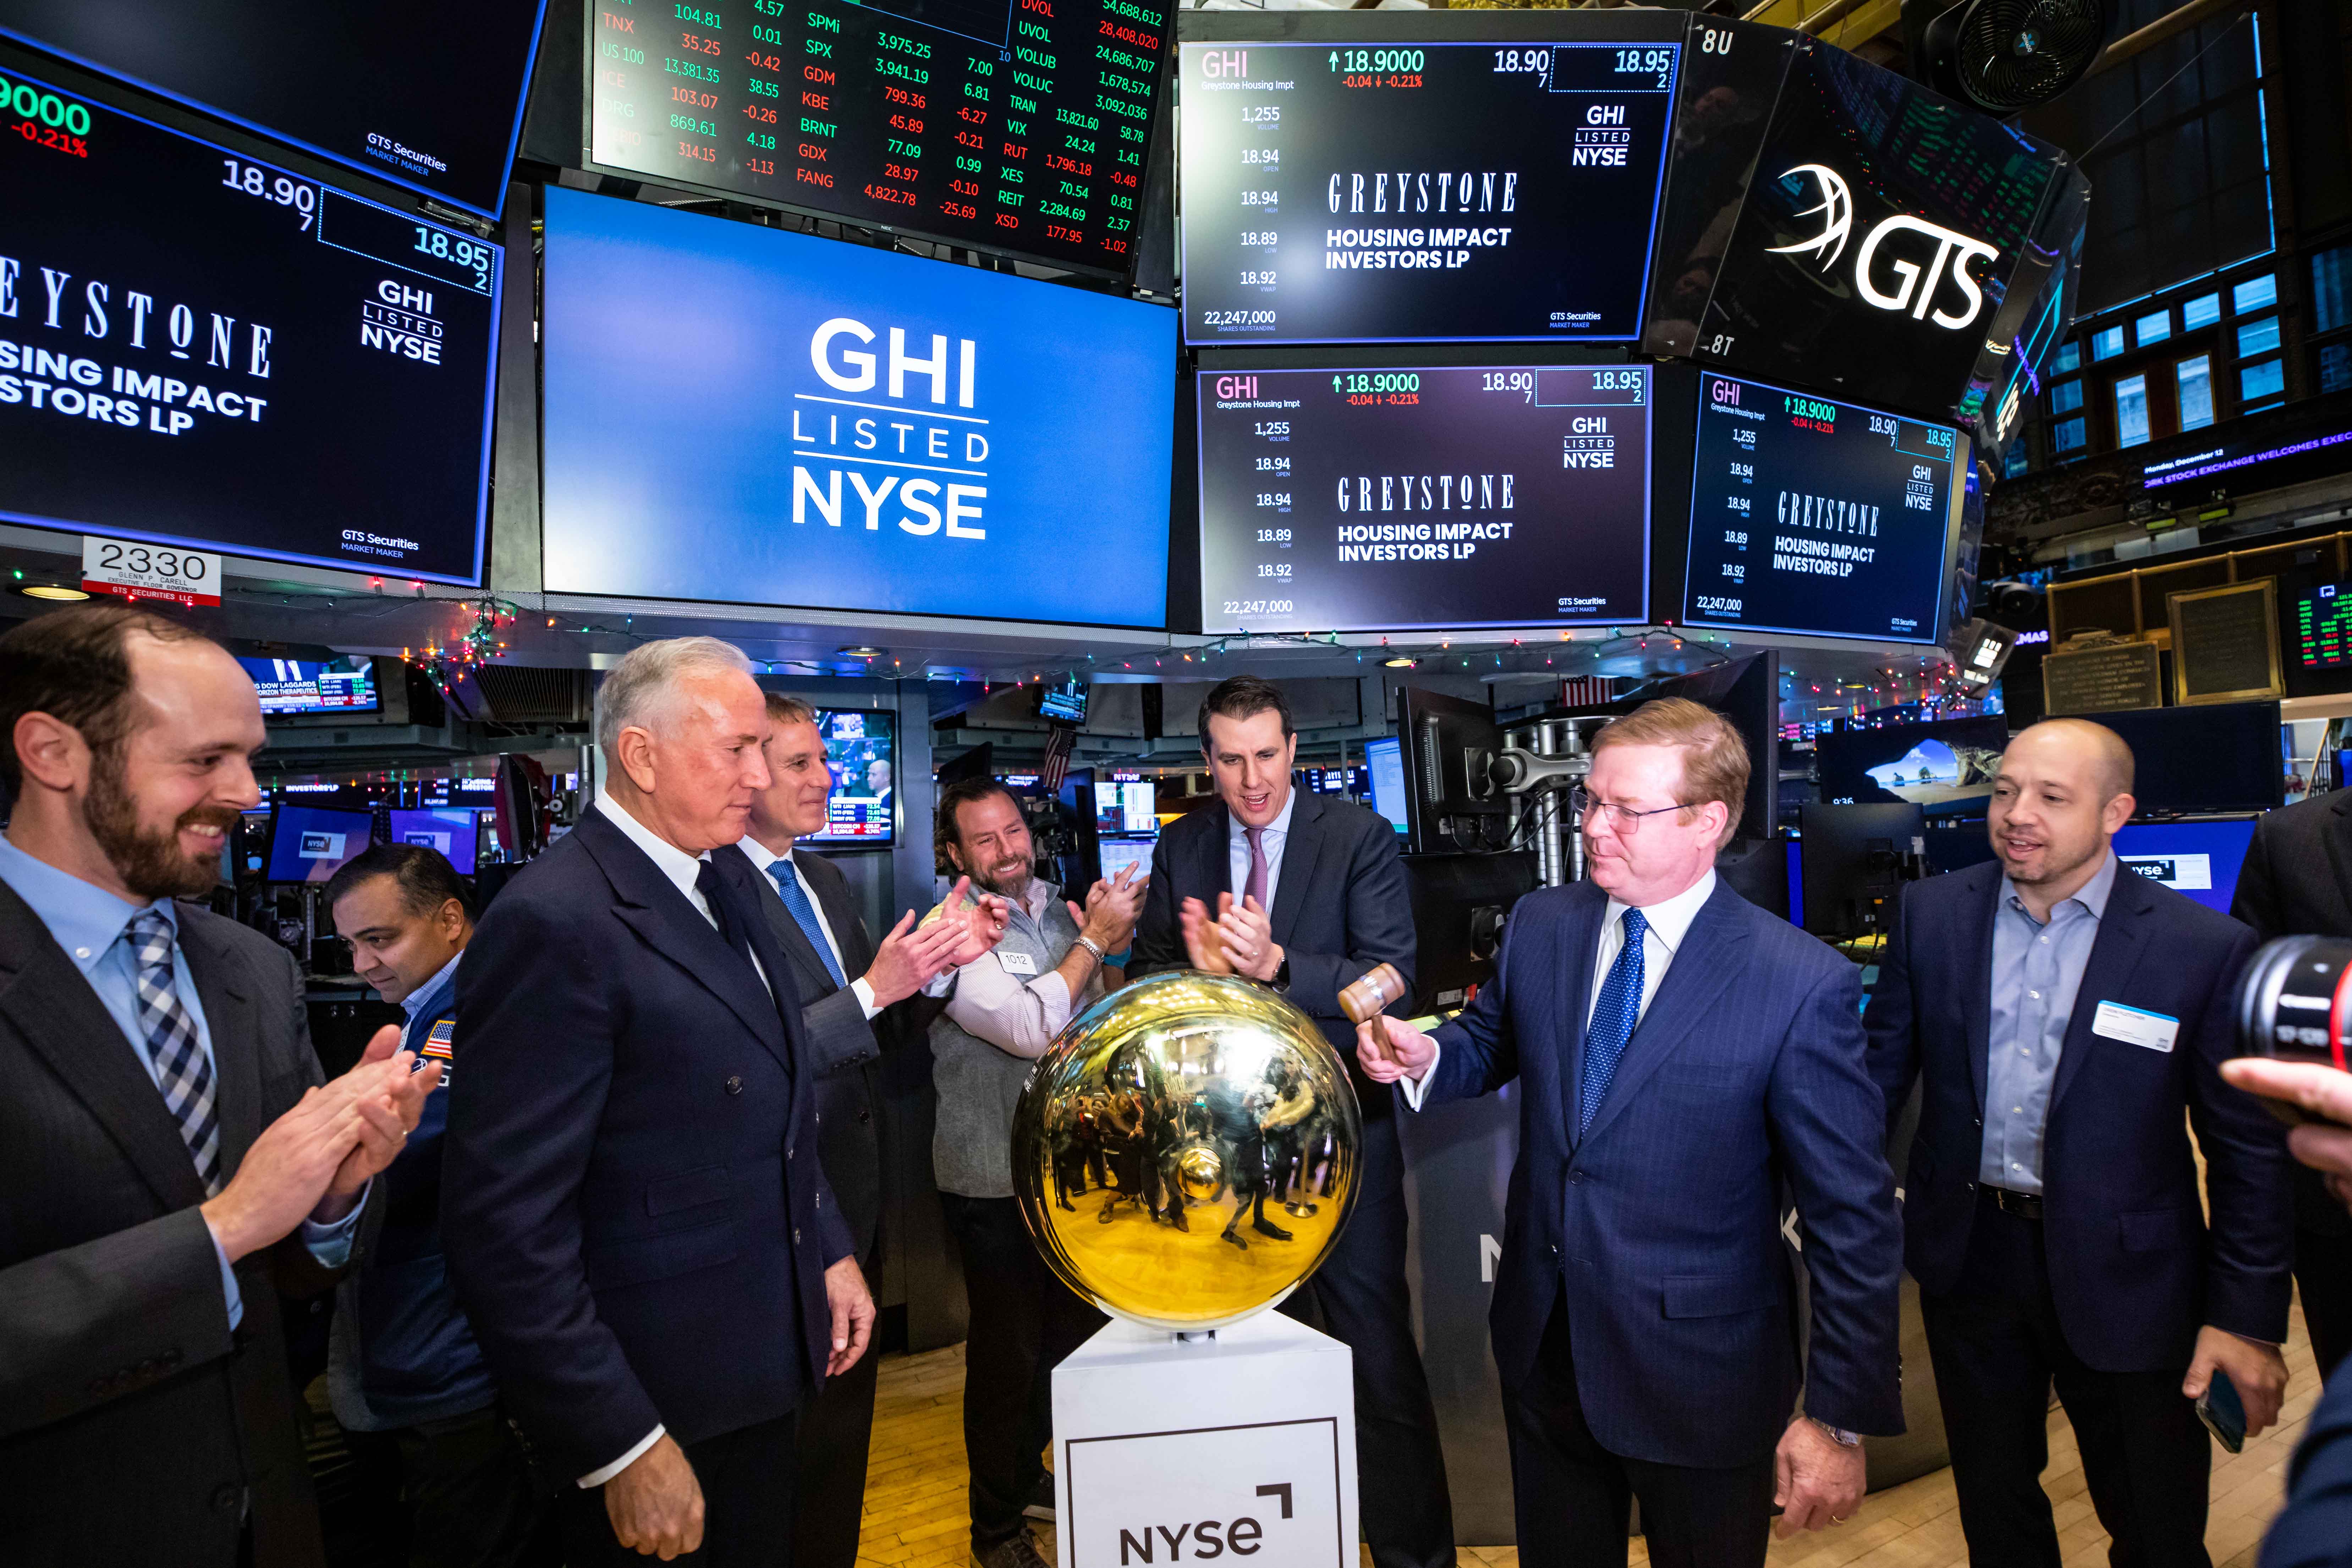 Greystone Housing Impact Investors LP Rings Opening Bell at New York Stock Exchange to Commemorate New Name and Listing